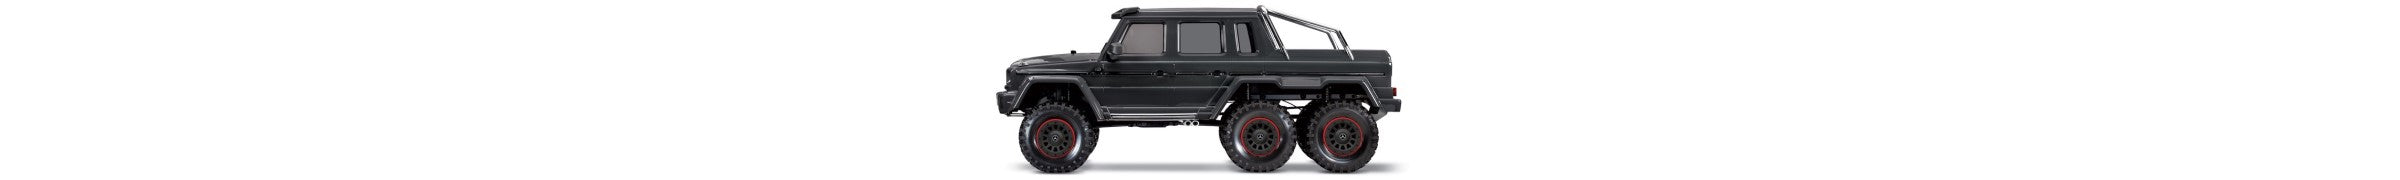 Parts For 88096-4 Traxxas TRX-6 Mercedes G63 AMG 6x6 1/10 Scale RC Trail Truck